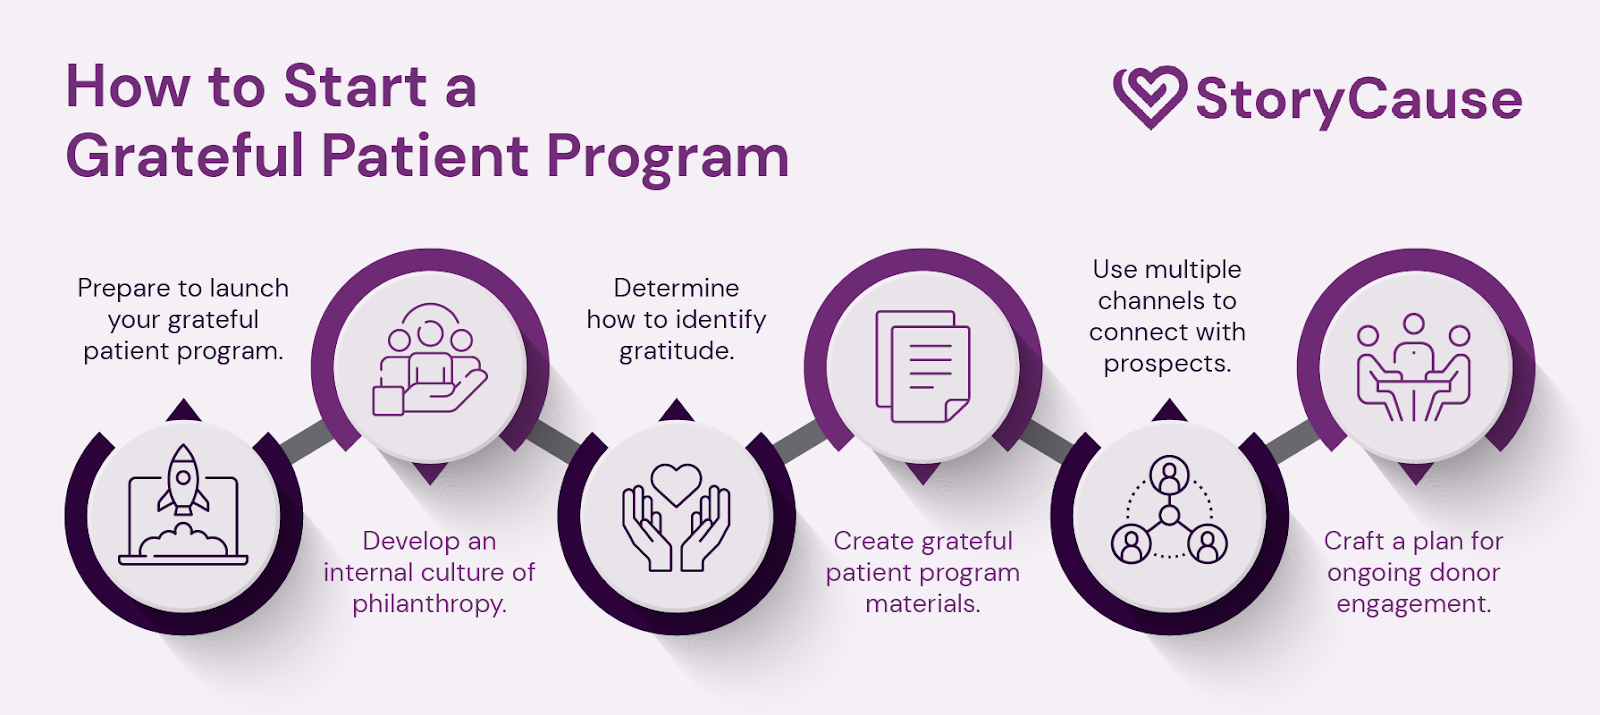 Six steps for starting a grateful patient program, as explained in more detail below.